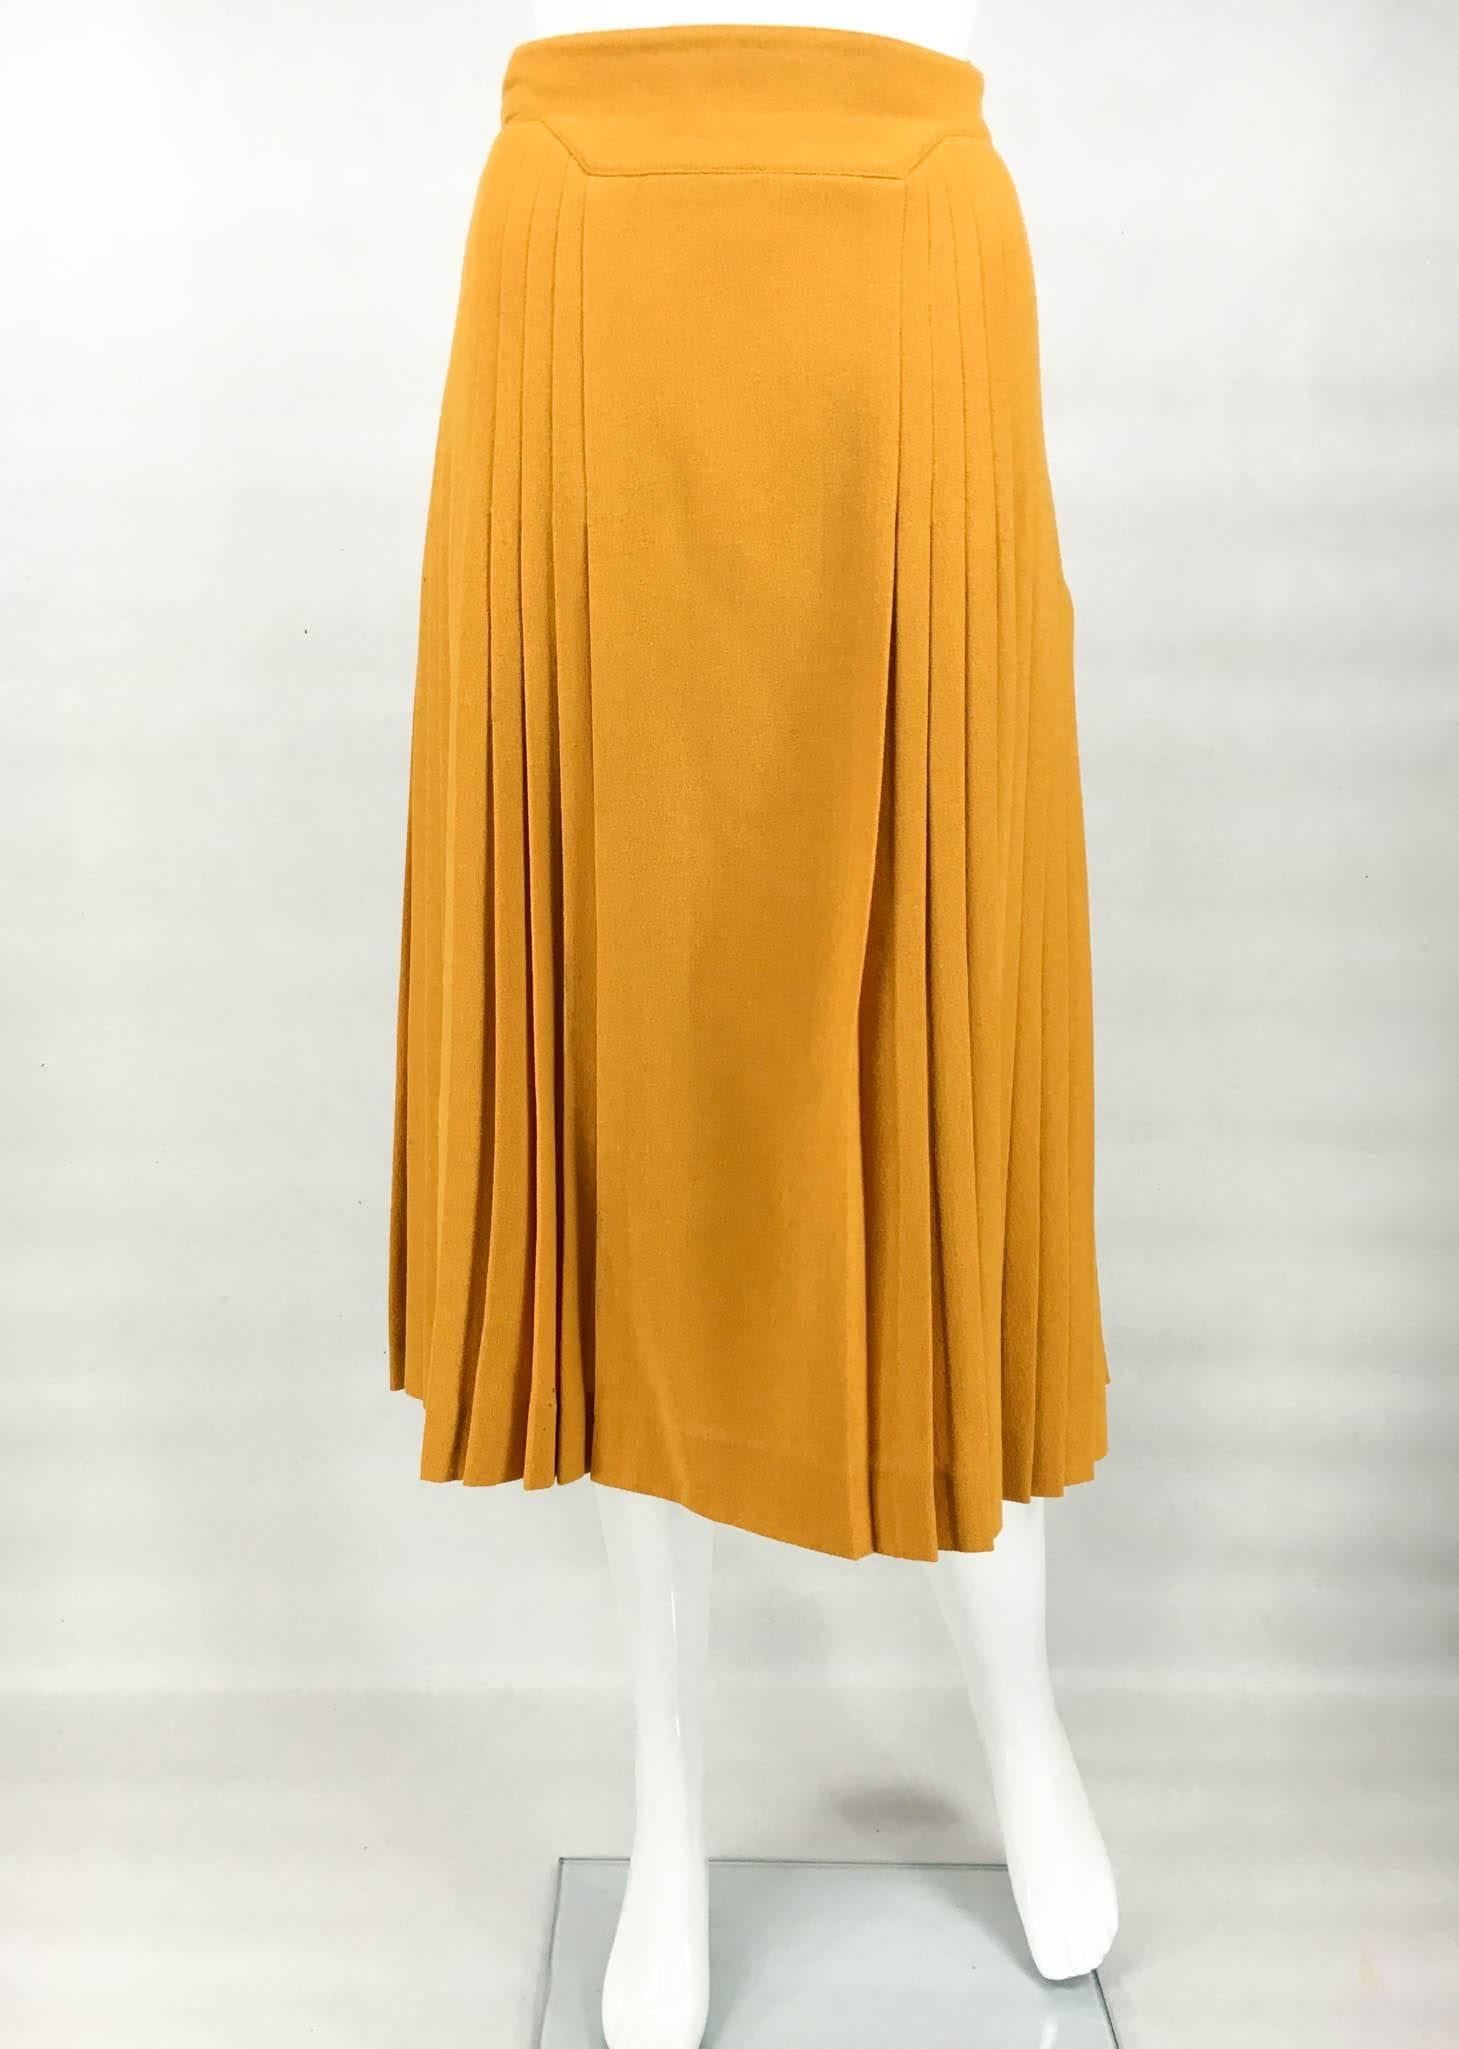 Dior Wool Crepe Pleated Skirt Ensemble - 1970s For Sale 1